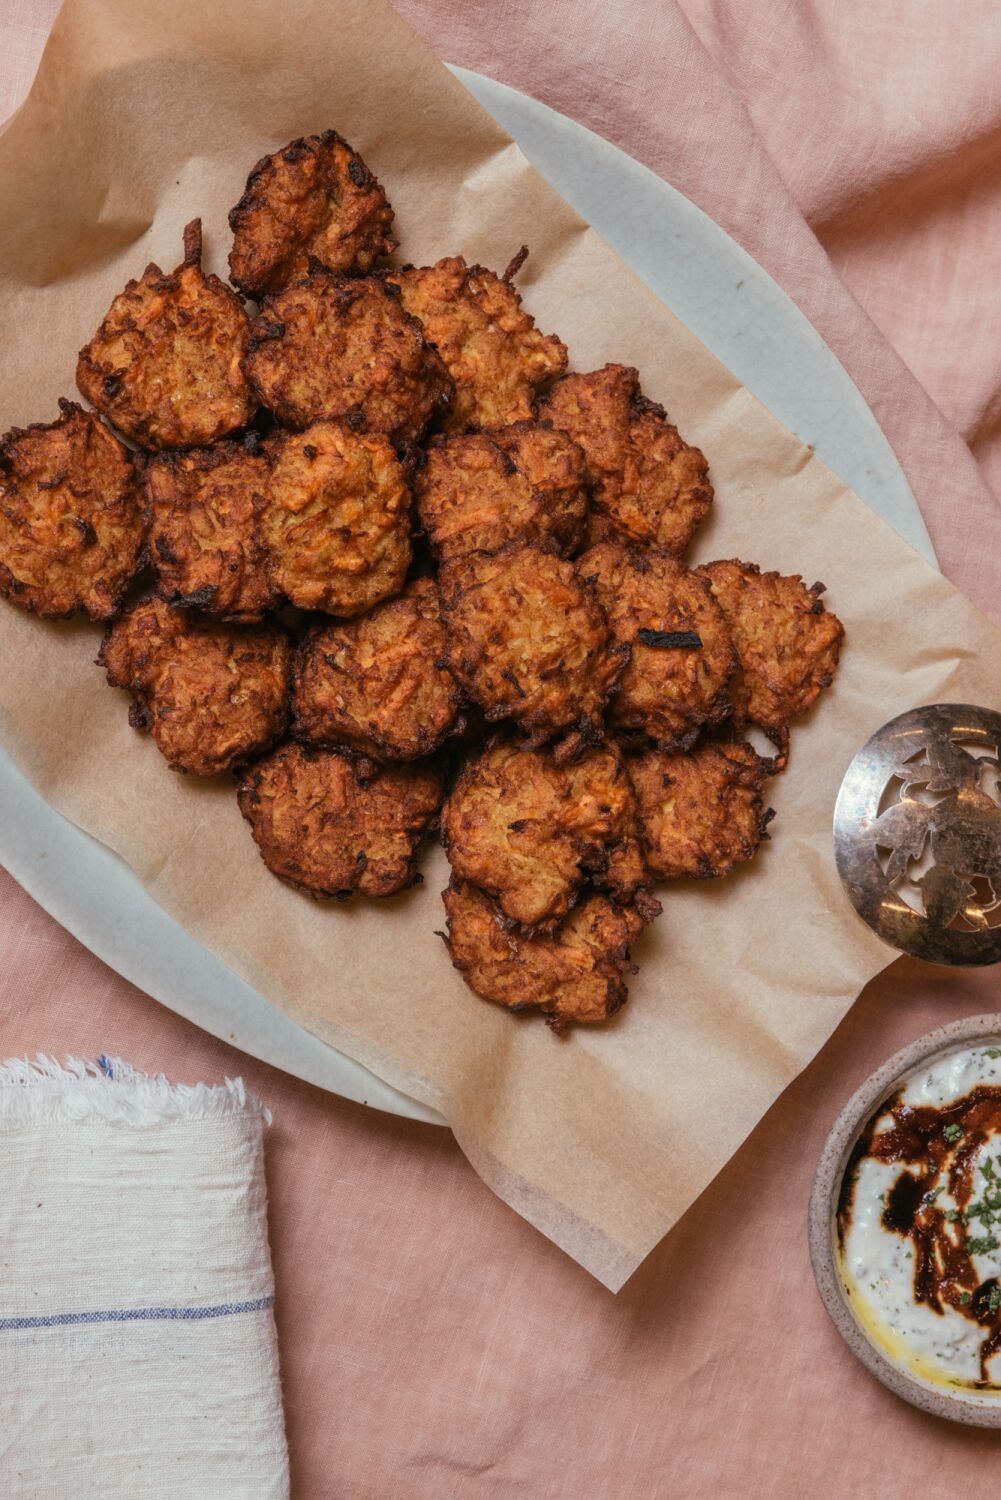 For Hanukkah, these crispy latkes are served with a Middle Eastern twist